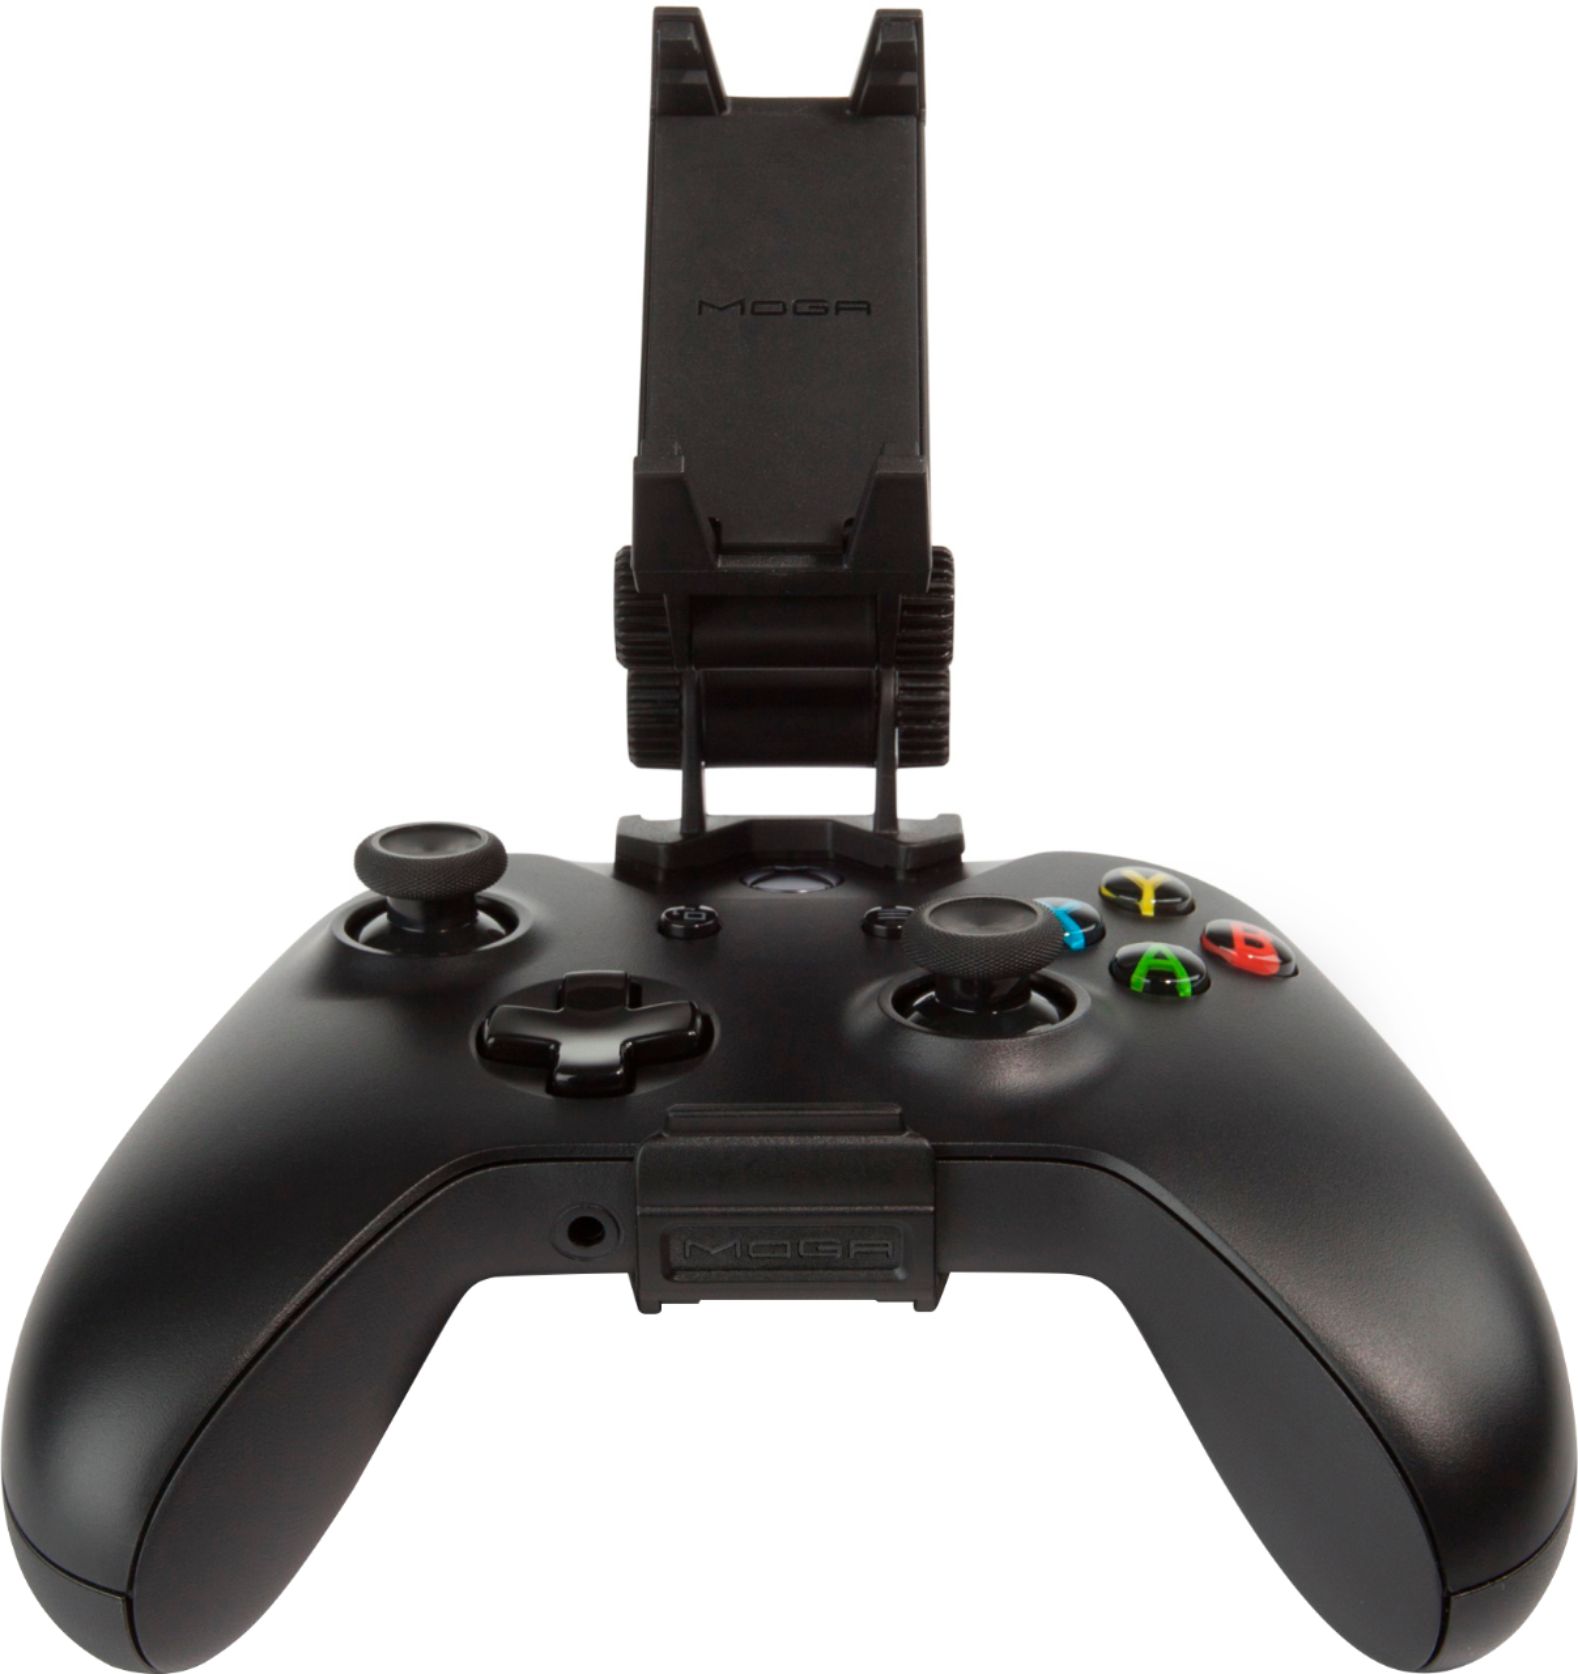 mobile gaming clip for xbox